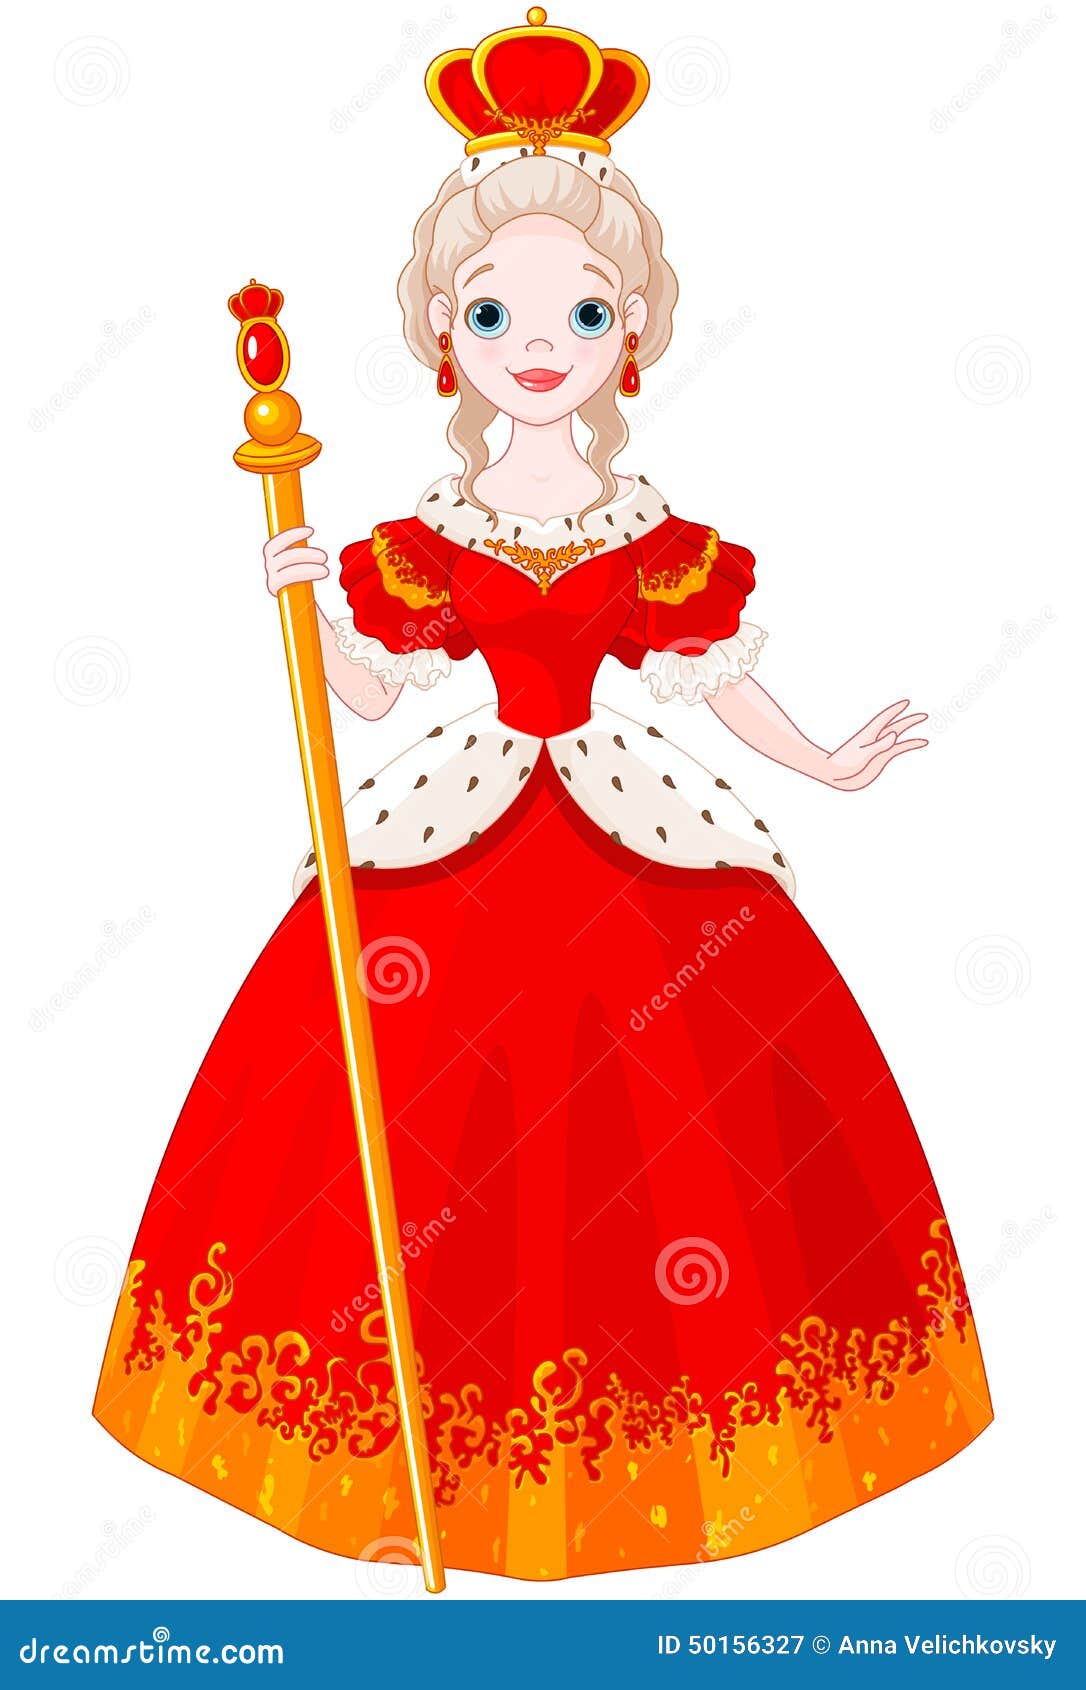 queen mary clipart - photo #21